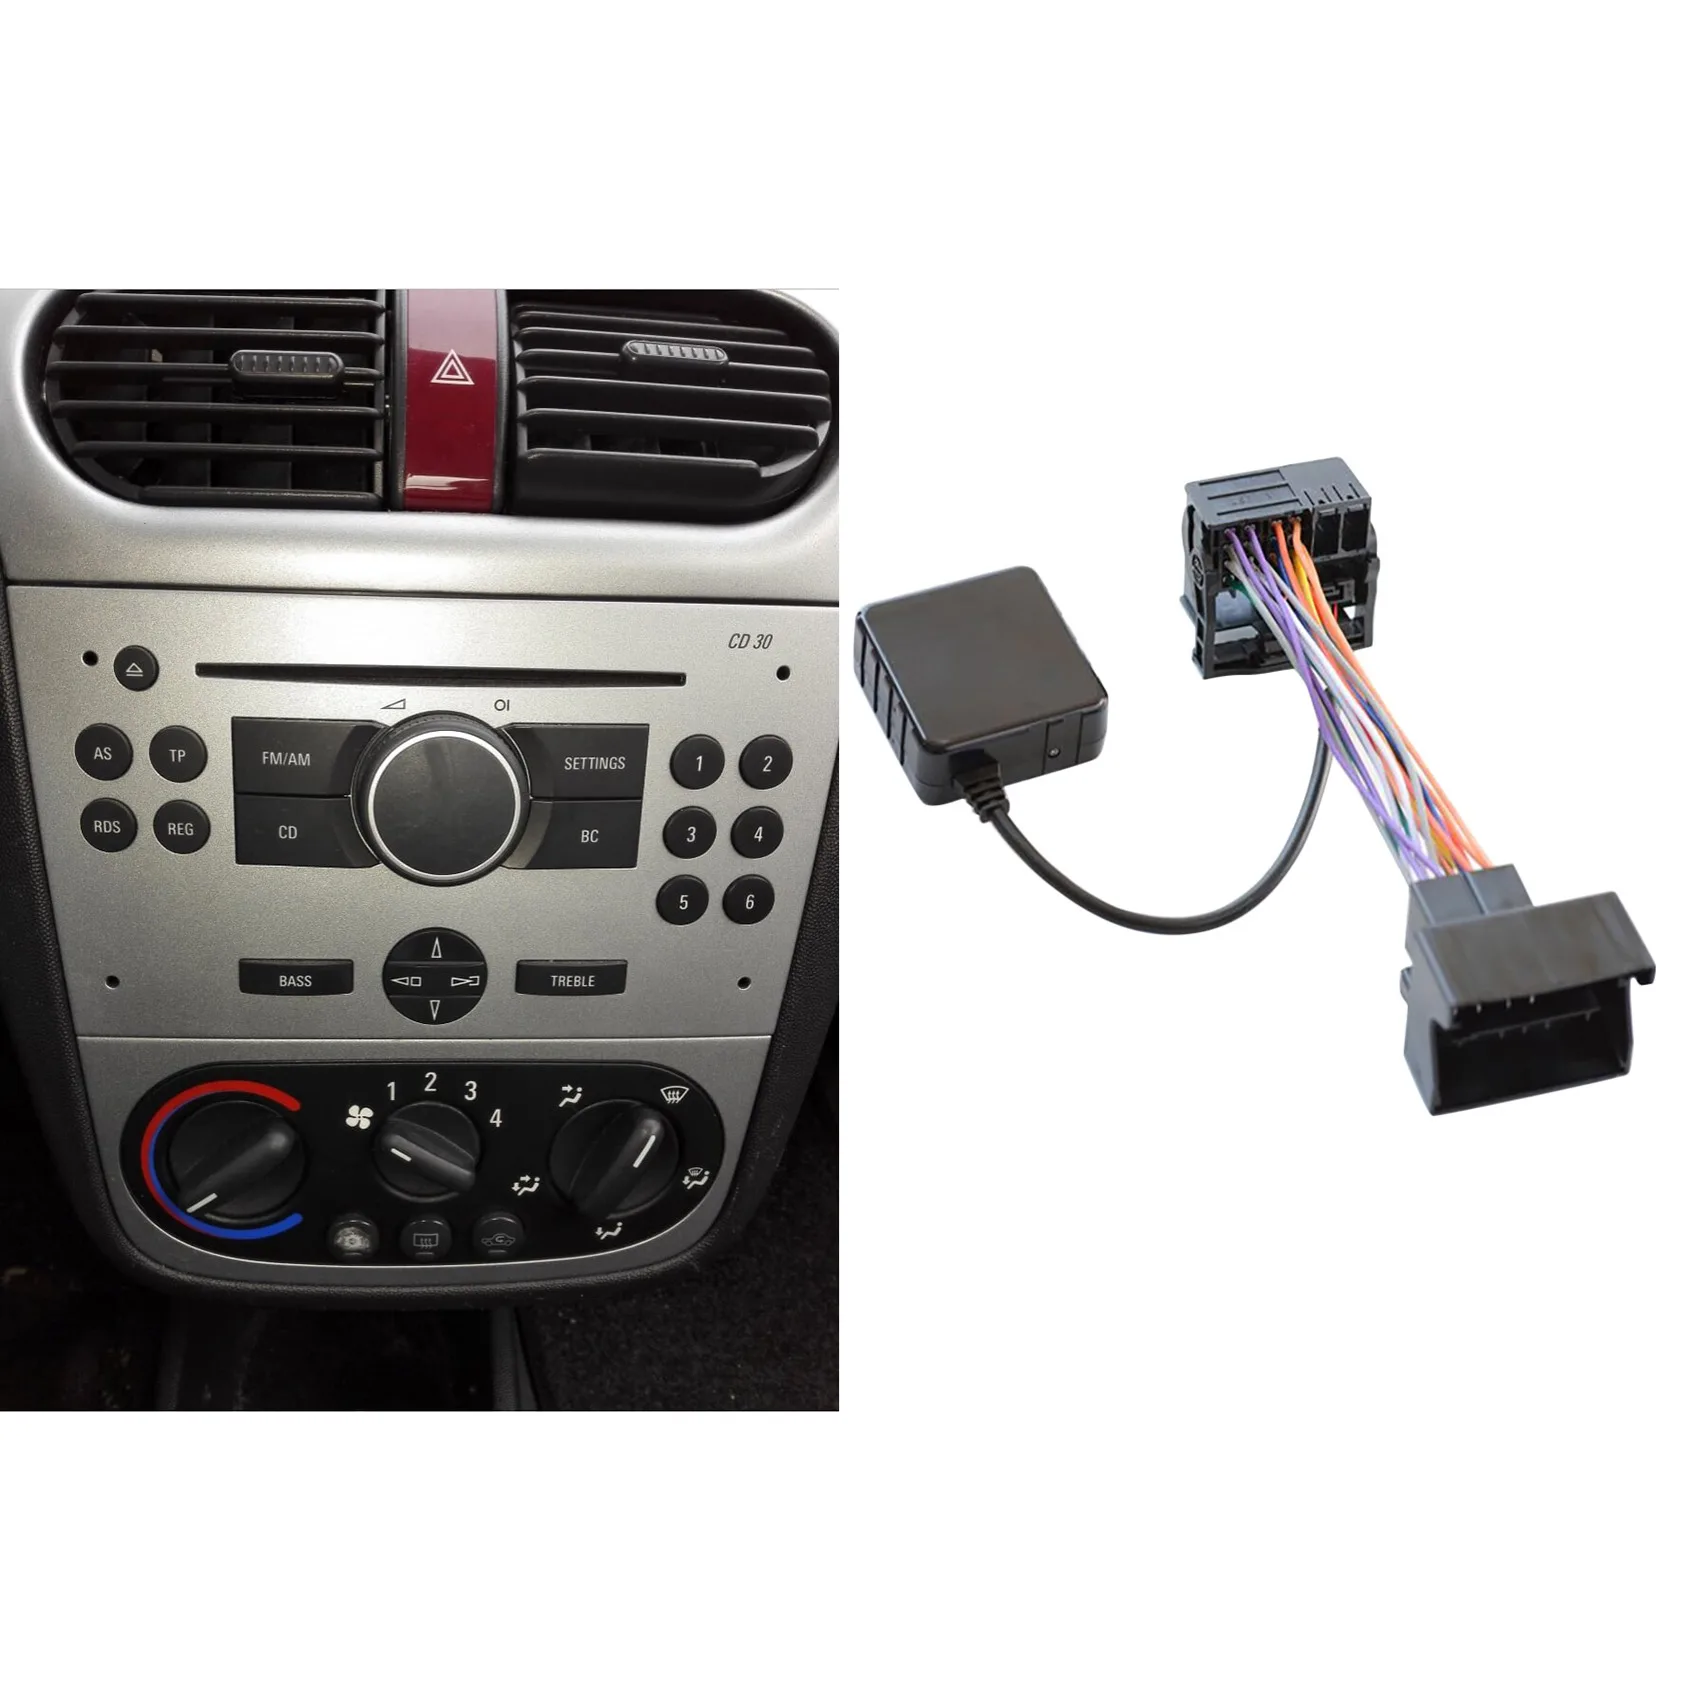 Car Aux Bluetooth Audio Receiver Adapter for OPEL zafira 2005 2000